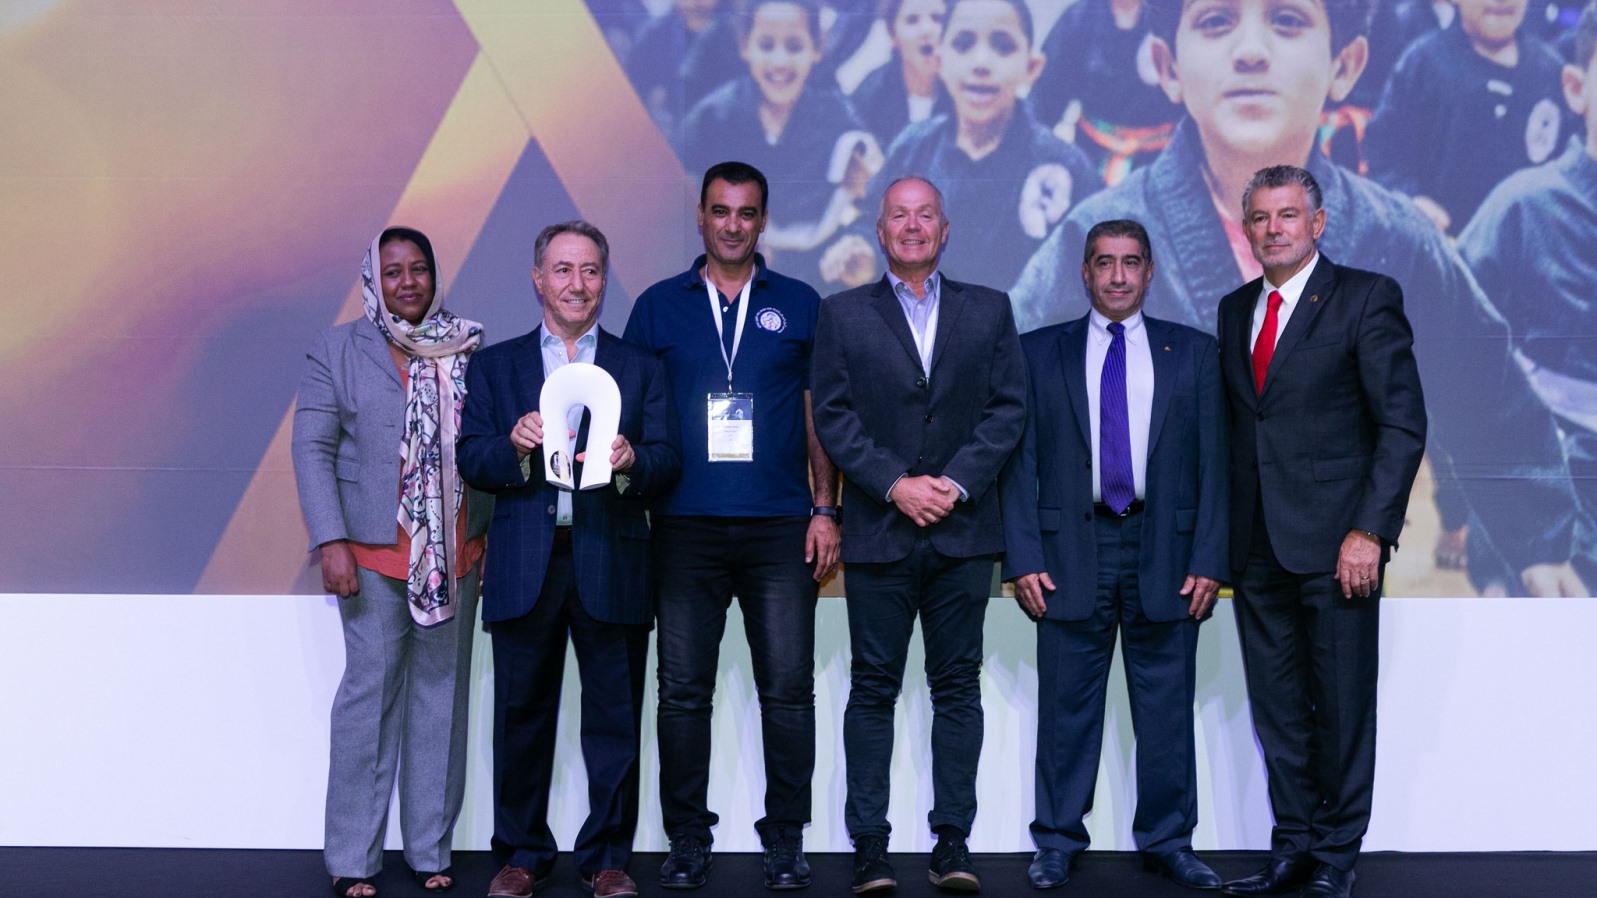 From left, UN Protection Officer Khalifa Rihab; Budo for Peace founder Danny Hakim; BFP COO and Education Director Robeen Arkia; BFP Board Member Harvey Belik; Sensei Keyvan Ghazi, BFP-Greece; and Peace and Sport President and Founder JoÃ«l Bouzou. Photo: courtesy